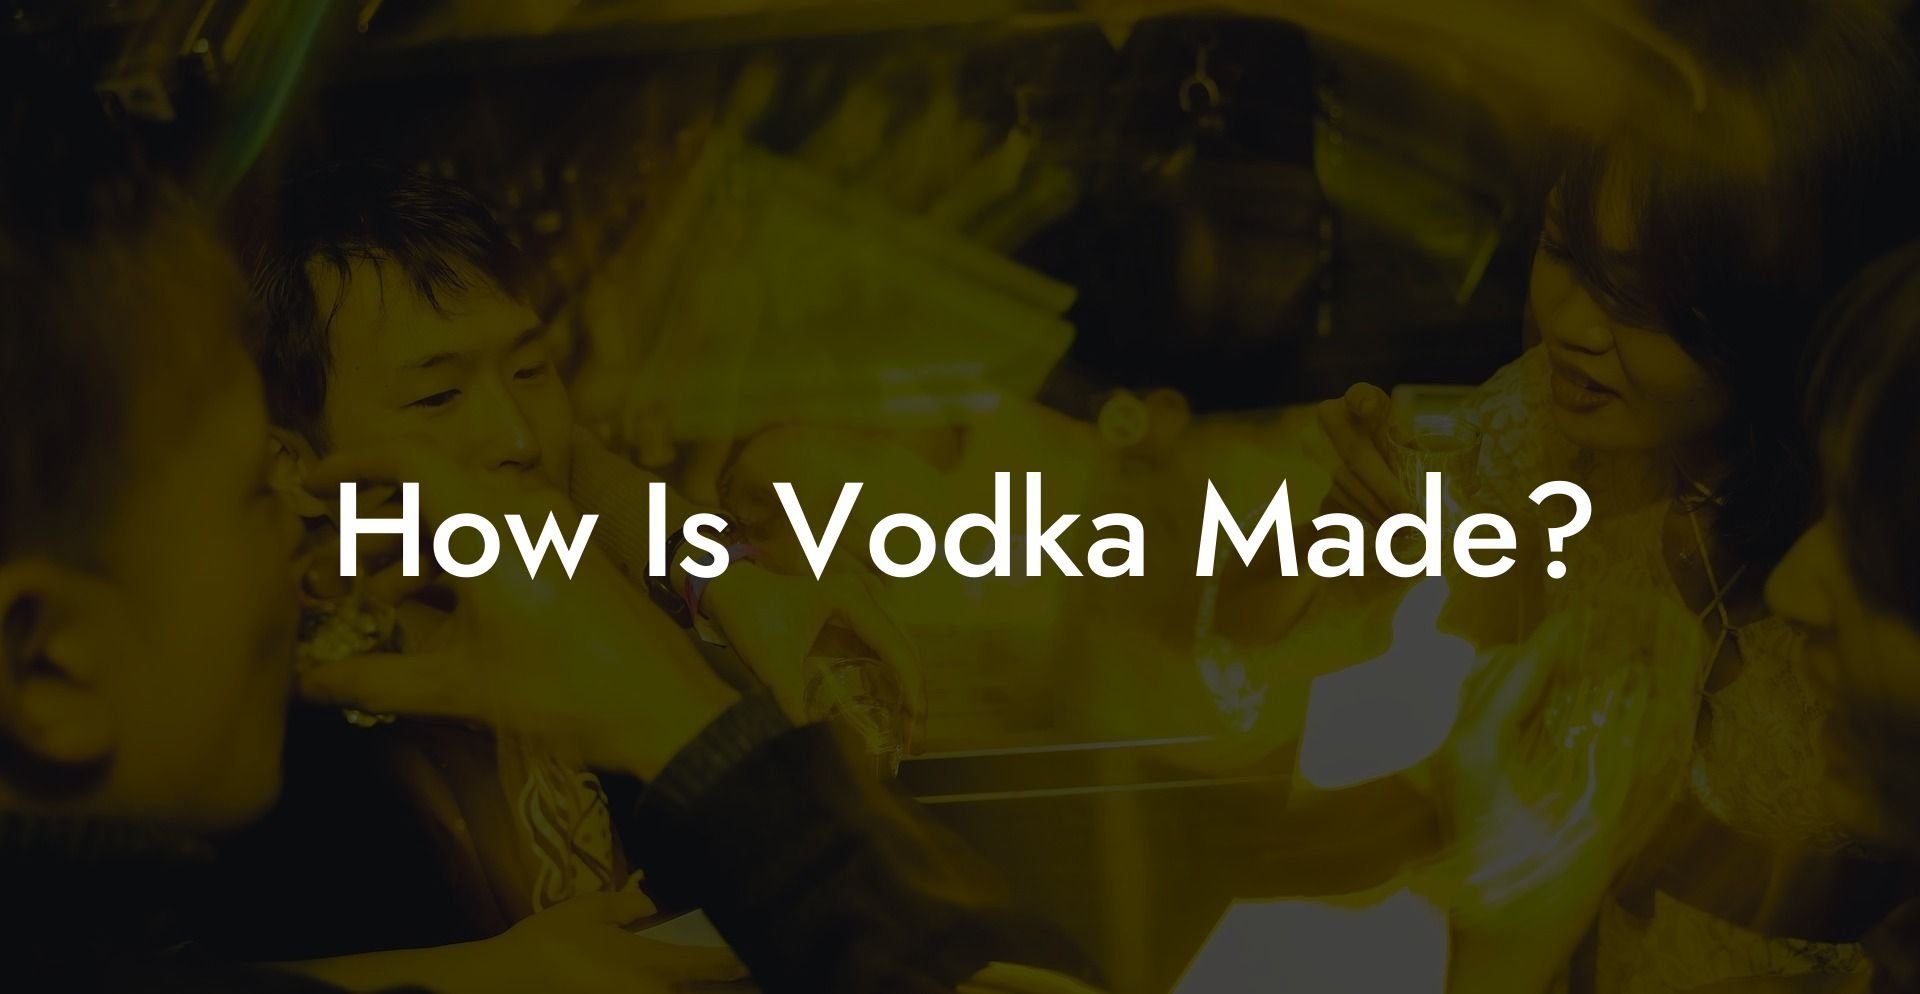 How Is Vodka Made